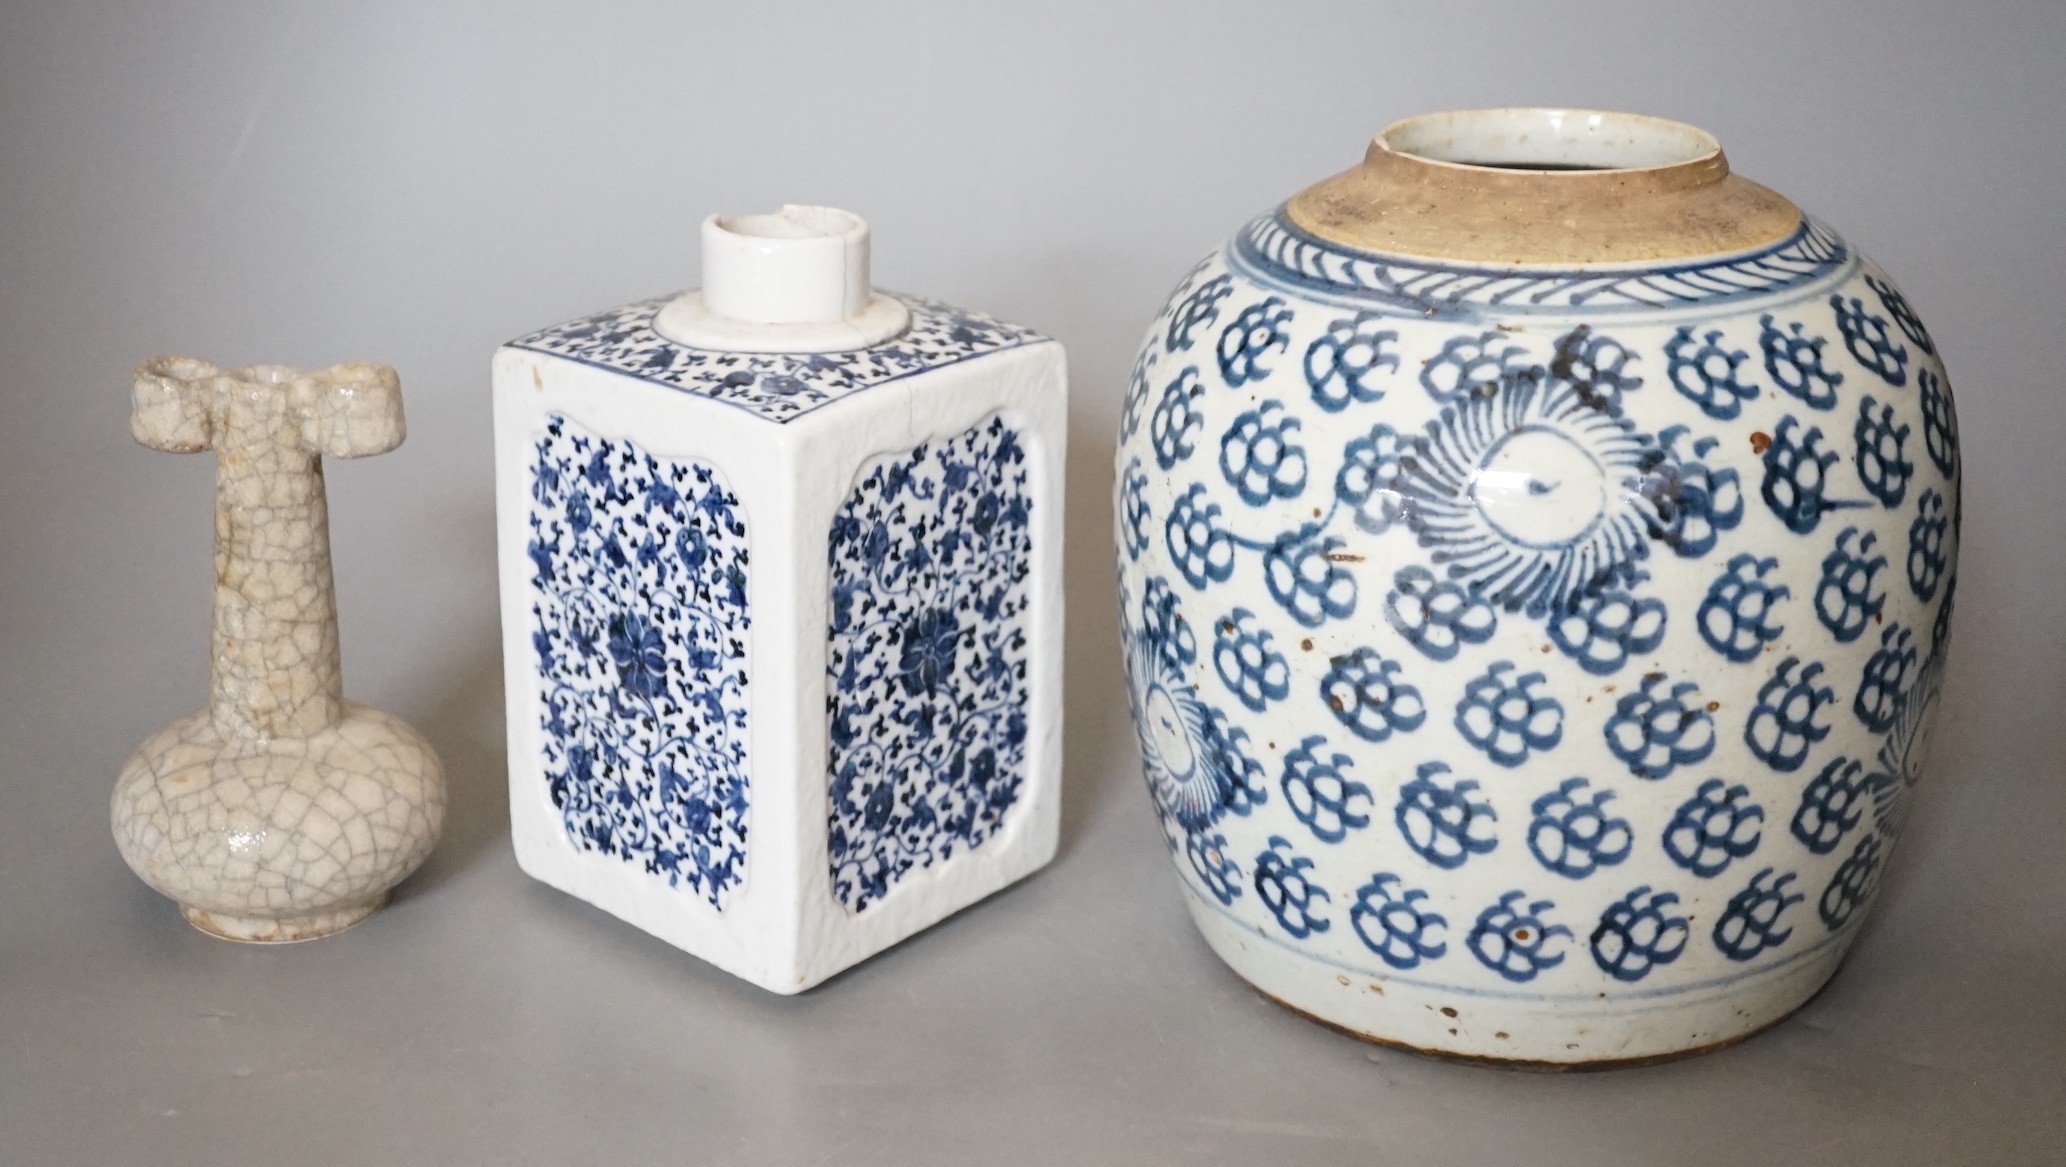 An 18th century Chinese provincial jar together with a tea canister and crackleglaze vase, tallest 18.5cm